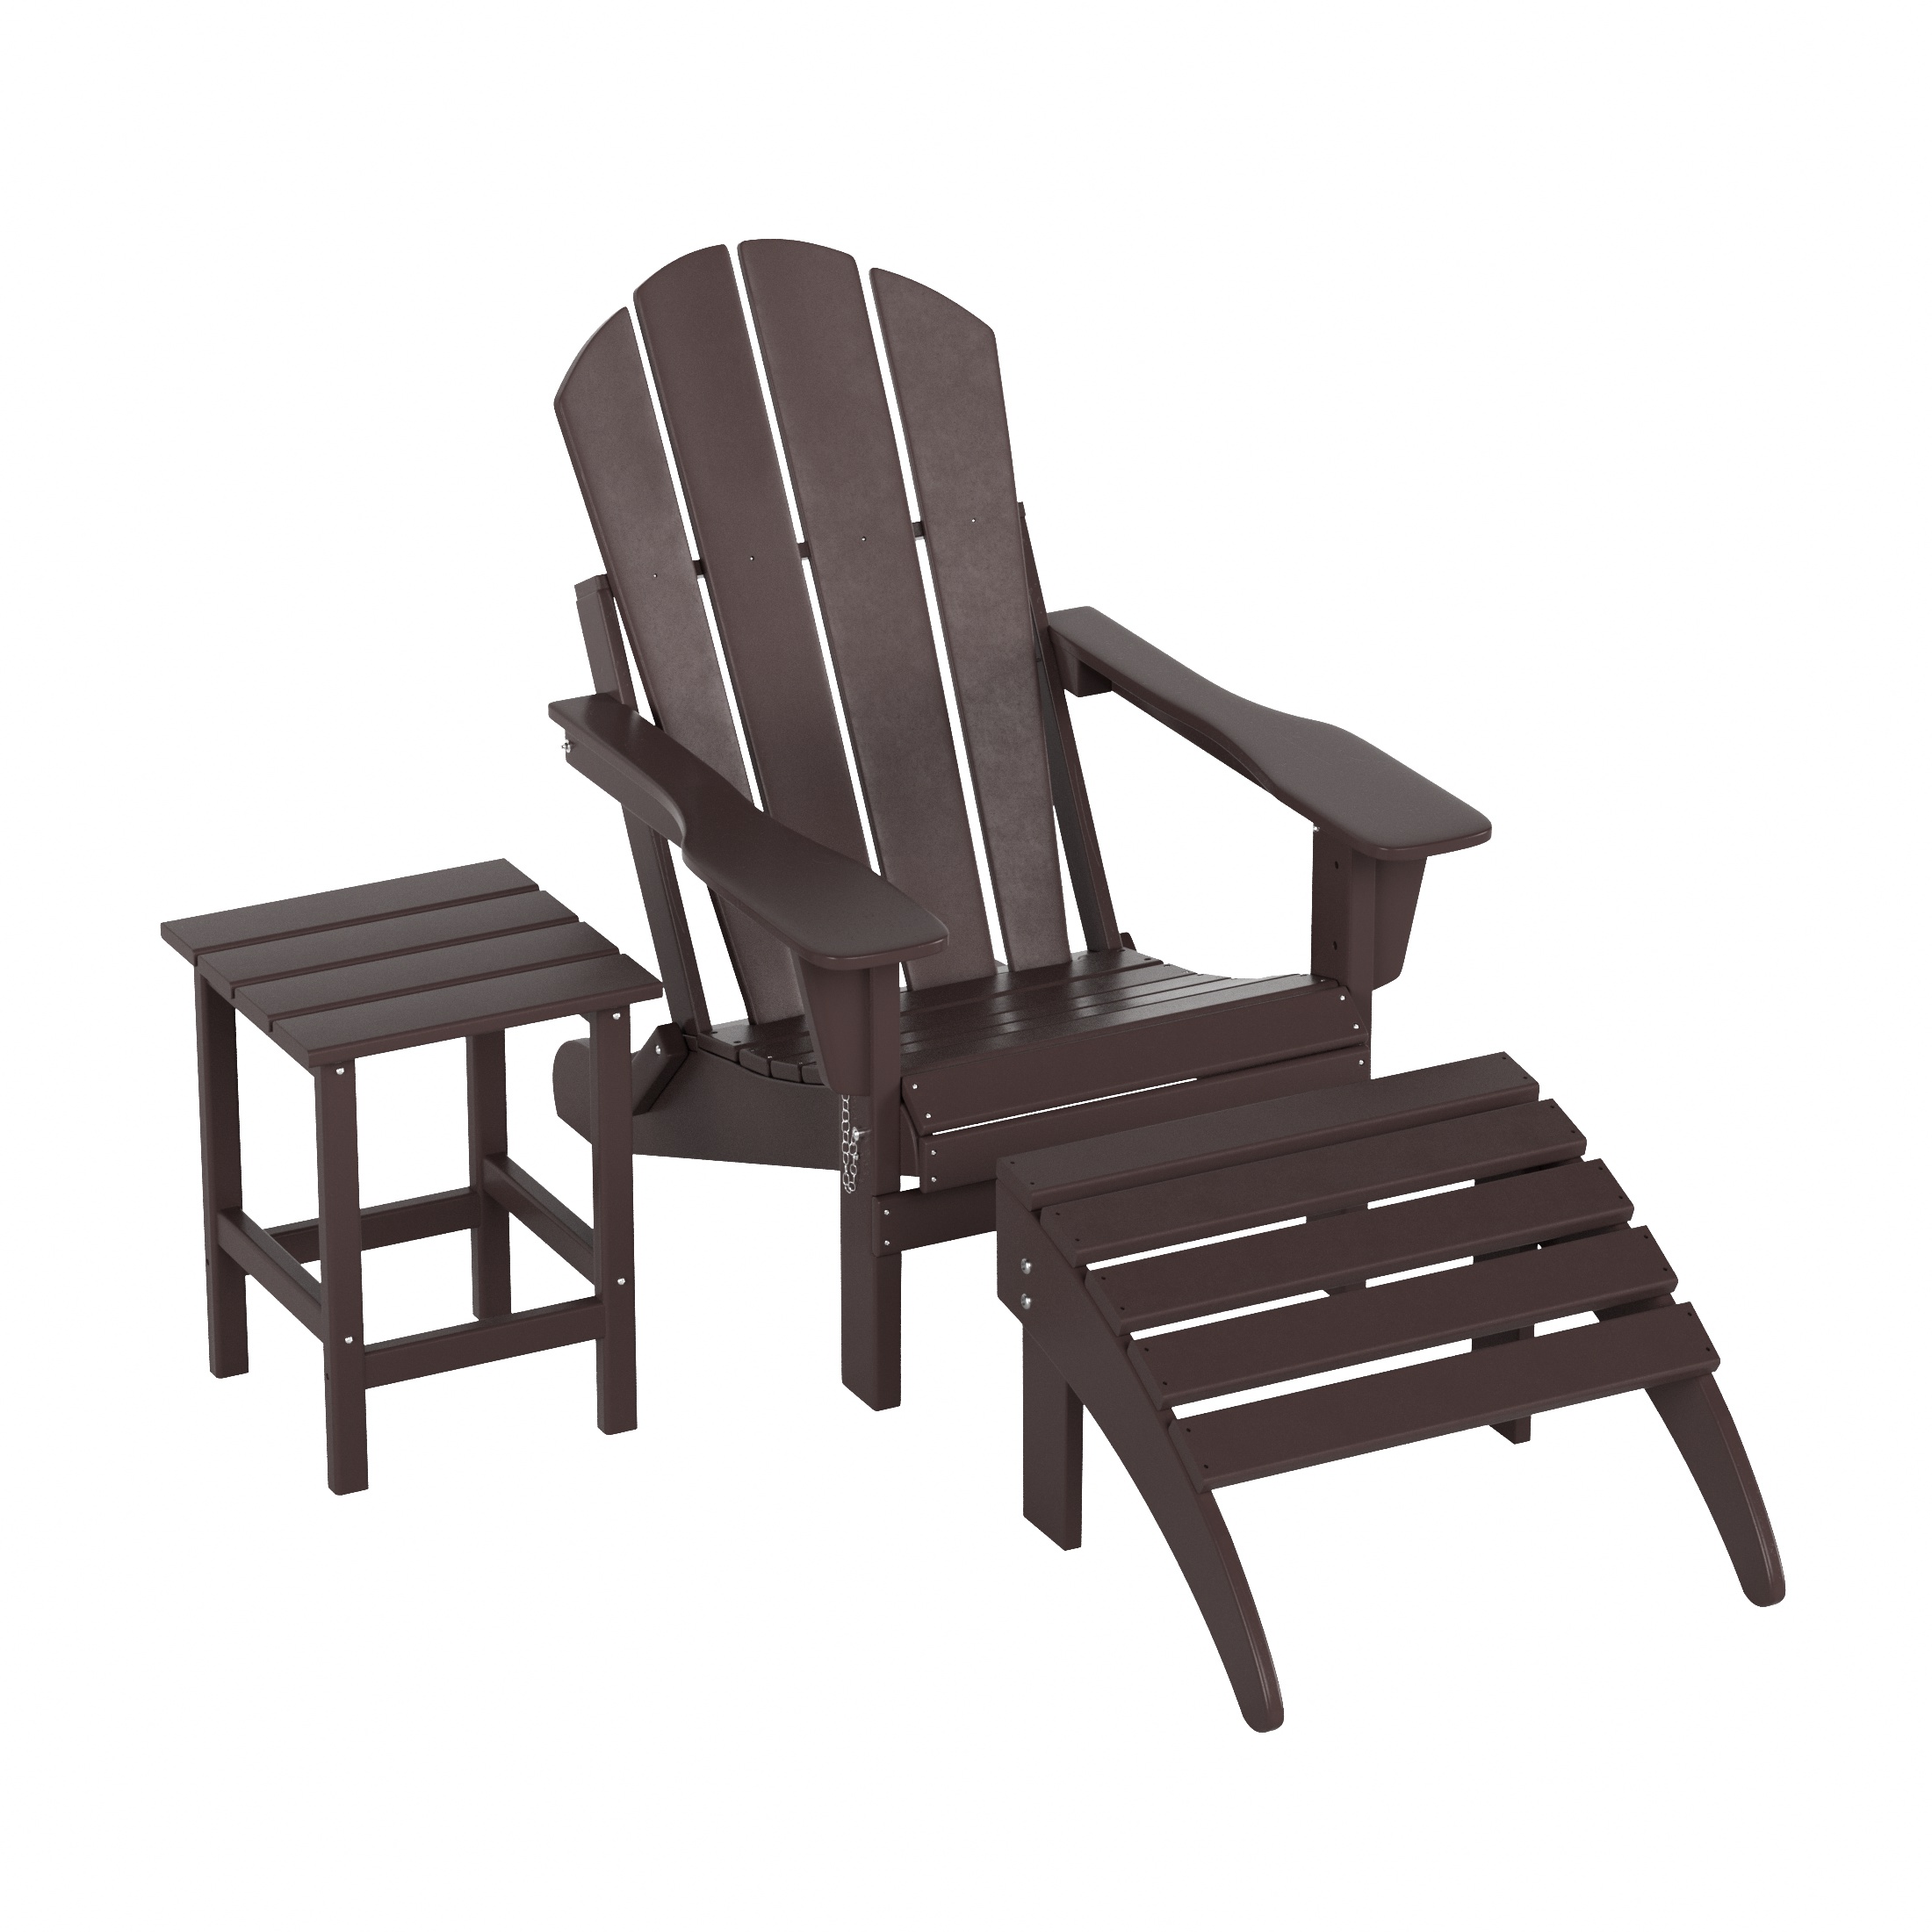 WestinTrends Malibu Outdoor Lounge Chairs, 3-Pieces Adirondack Chair Set with Ottoman and Side Table, All Weather Poly Lumber Patio Lawn Folding Chair for Outside Pool Garden Backyard, Dark Brown - image 1 of 7